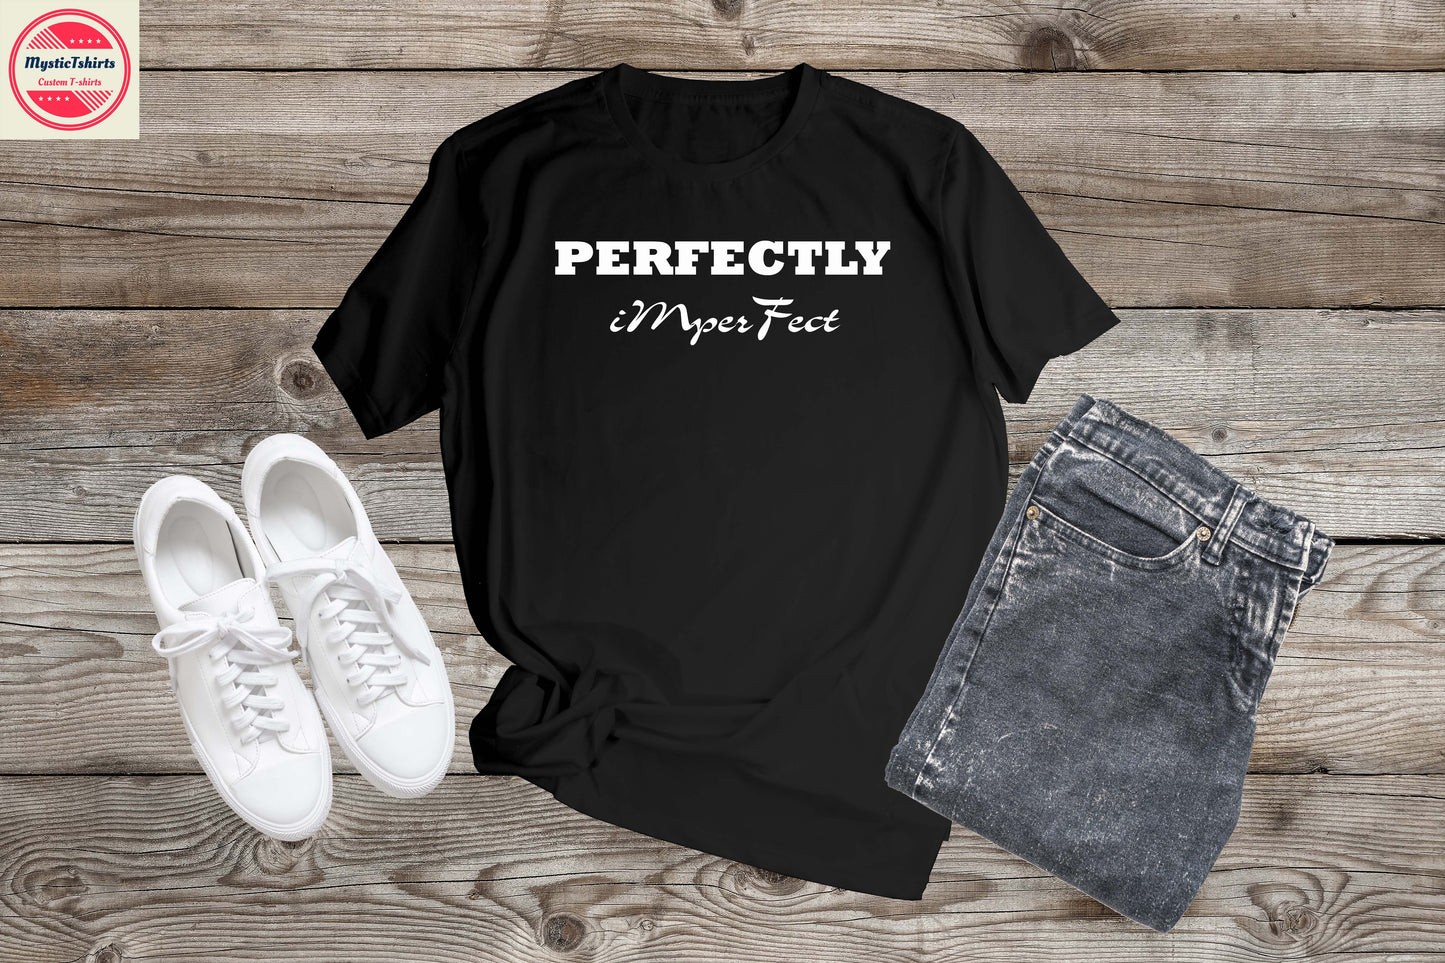 399. PERFECTLY IMPERFECT, Custom Made Shirt, Personalized T-Shirt, Custom Text, Make Your Own Shirt, Custom Tee